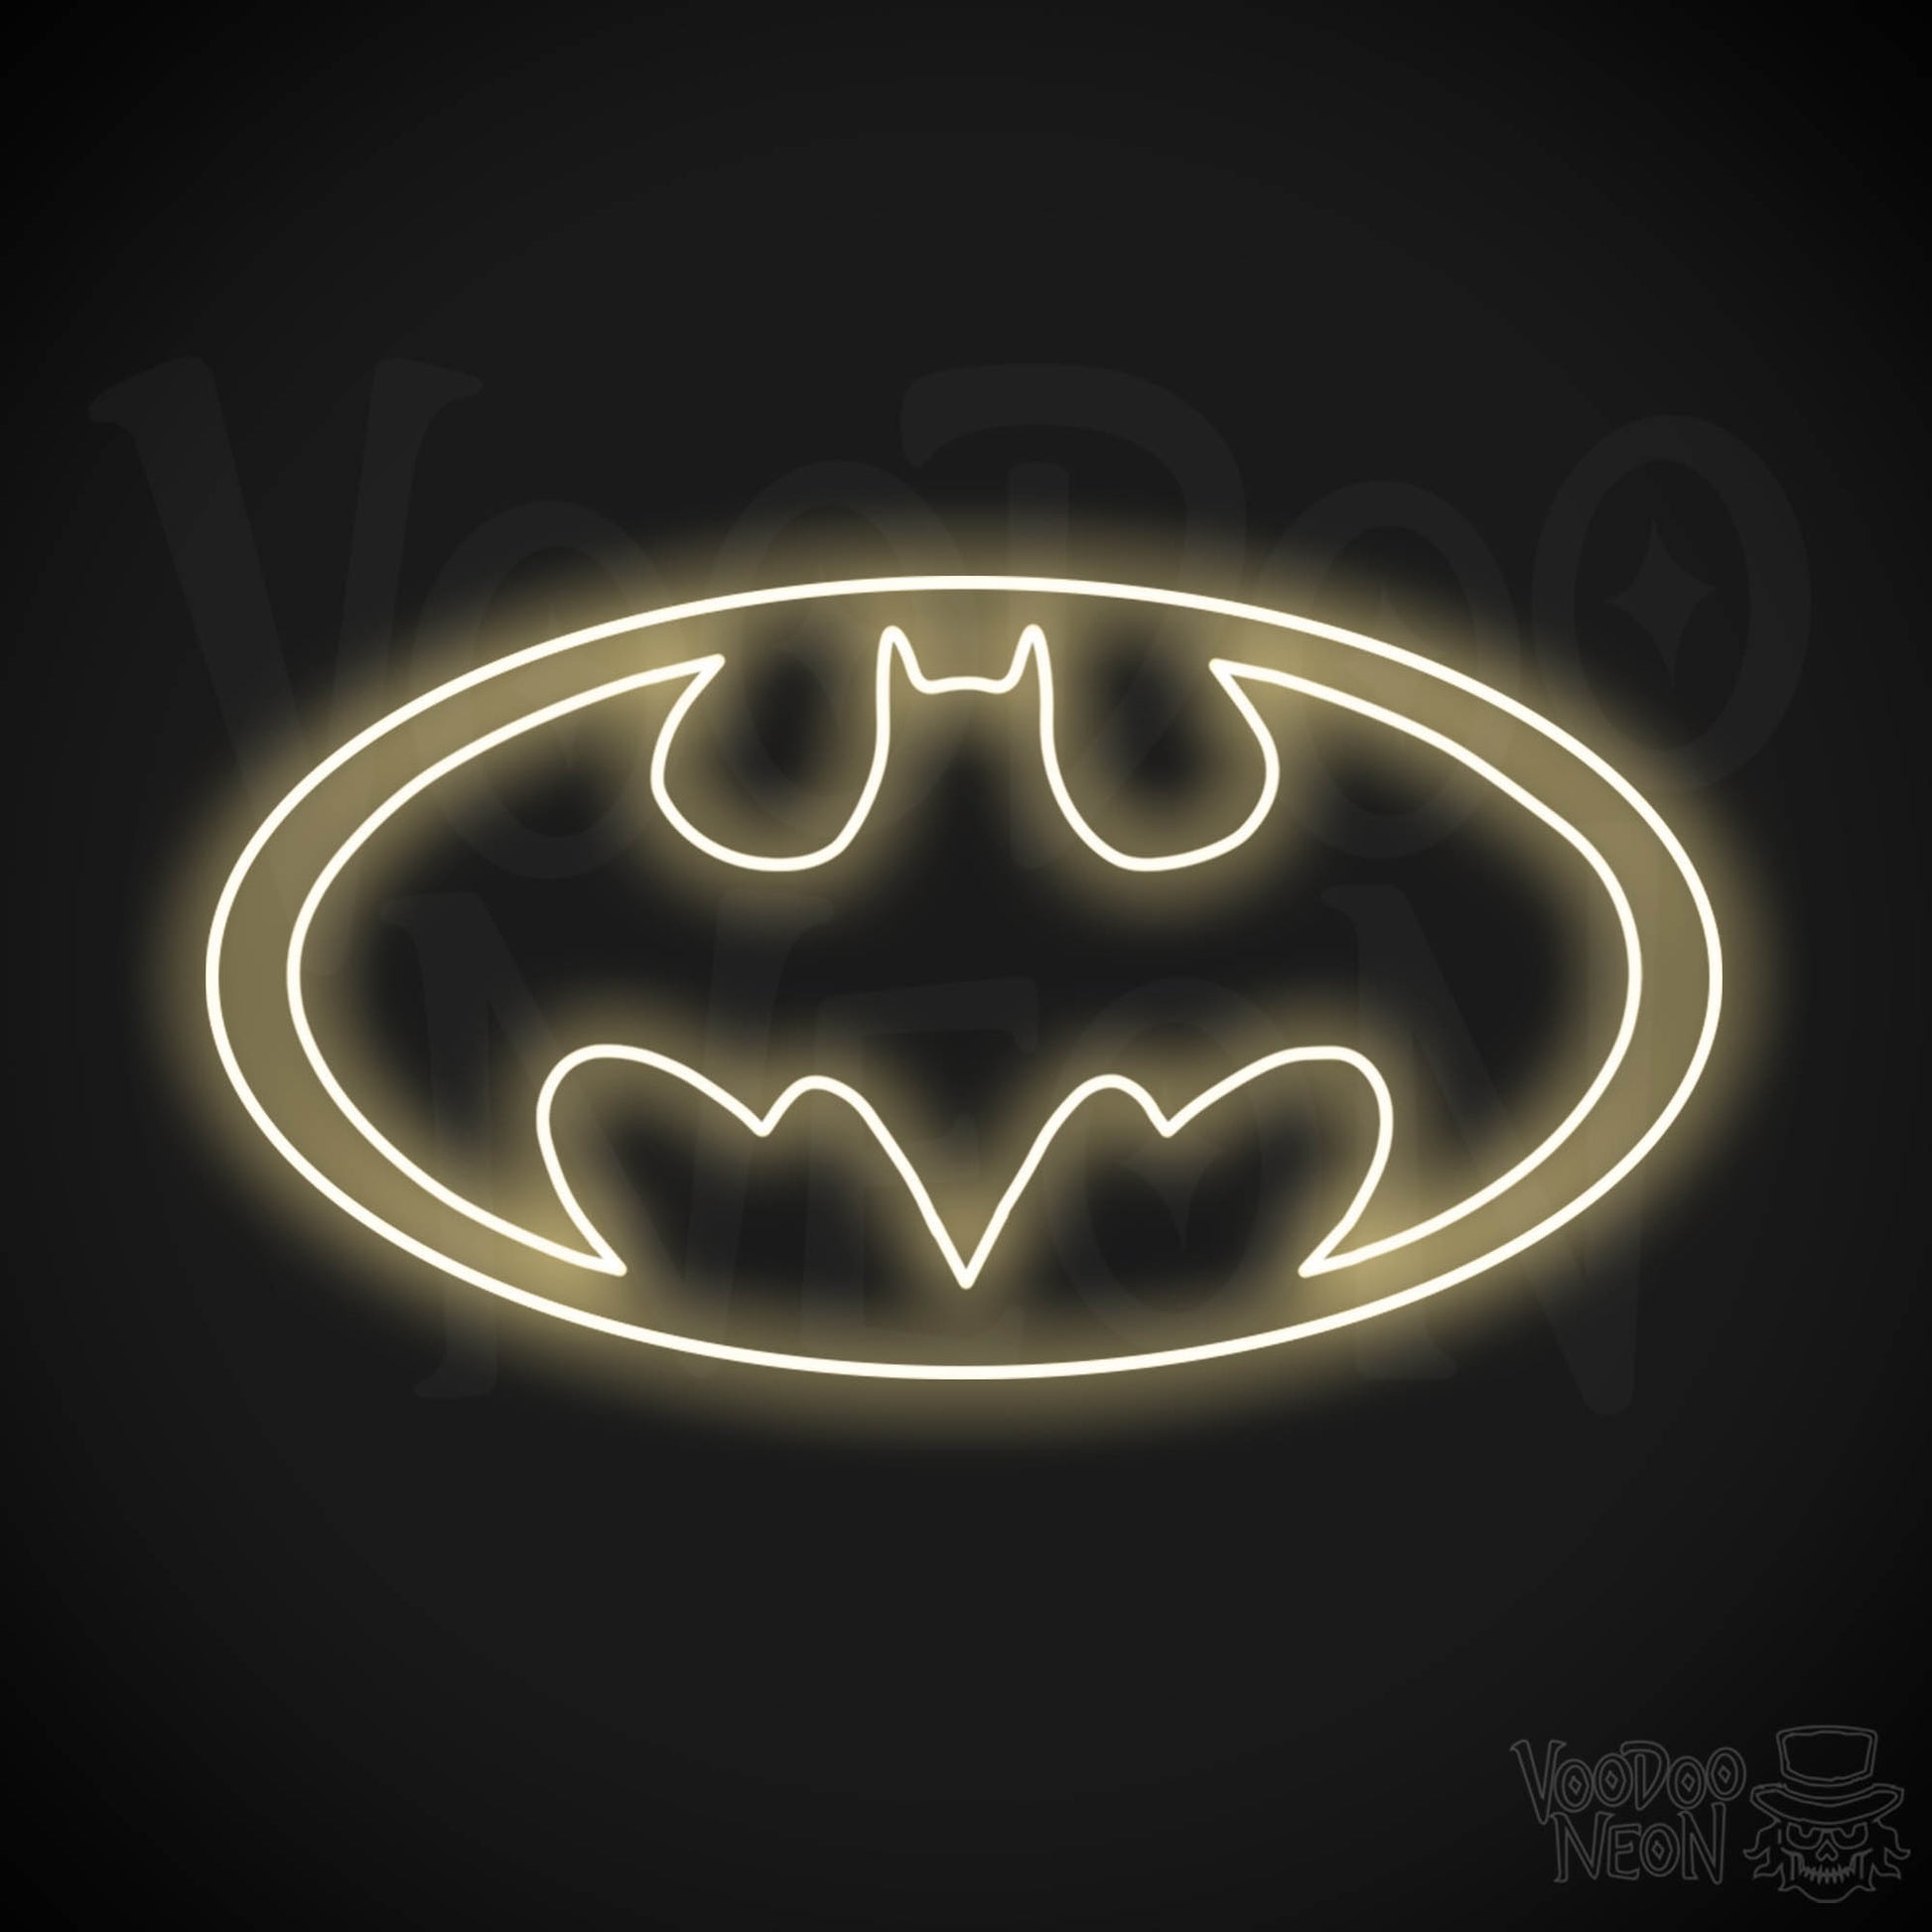 Batman Neon Sign - Batman Sign - Batman Light - Batman Symbol Wall Art - LED Sign - Color Warm White